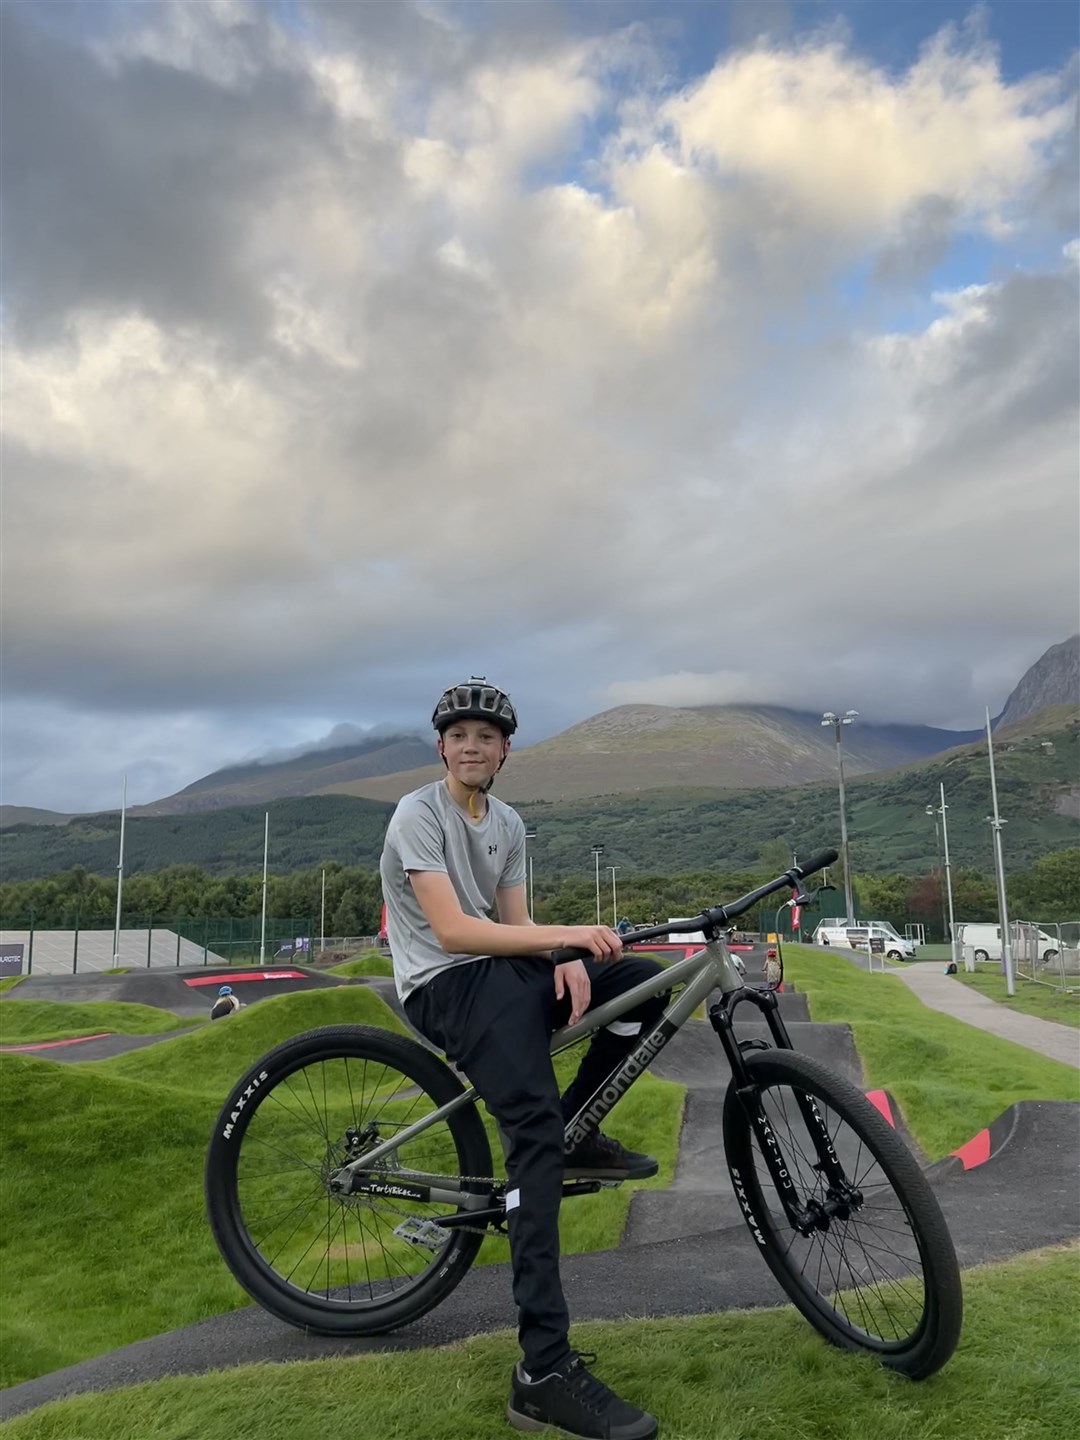 A long journey to Glasgow proved no obstacle for Caleb Rigg when he won his Ride the World event.